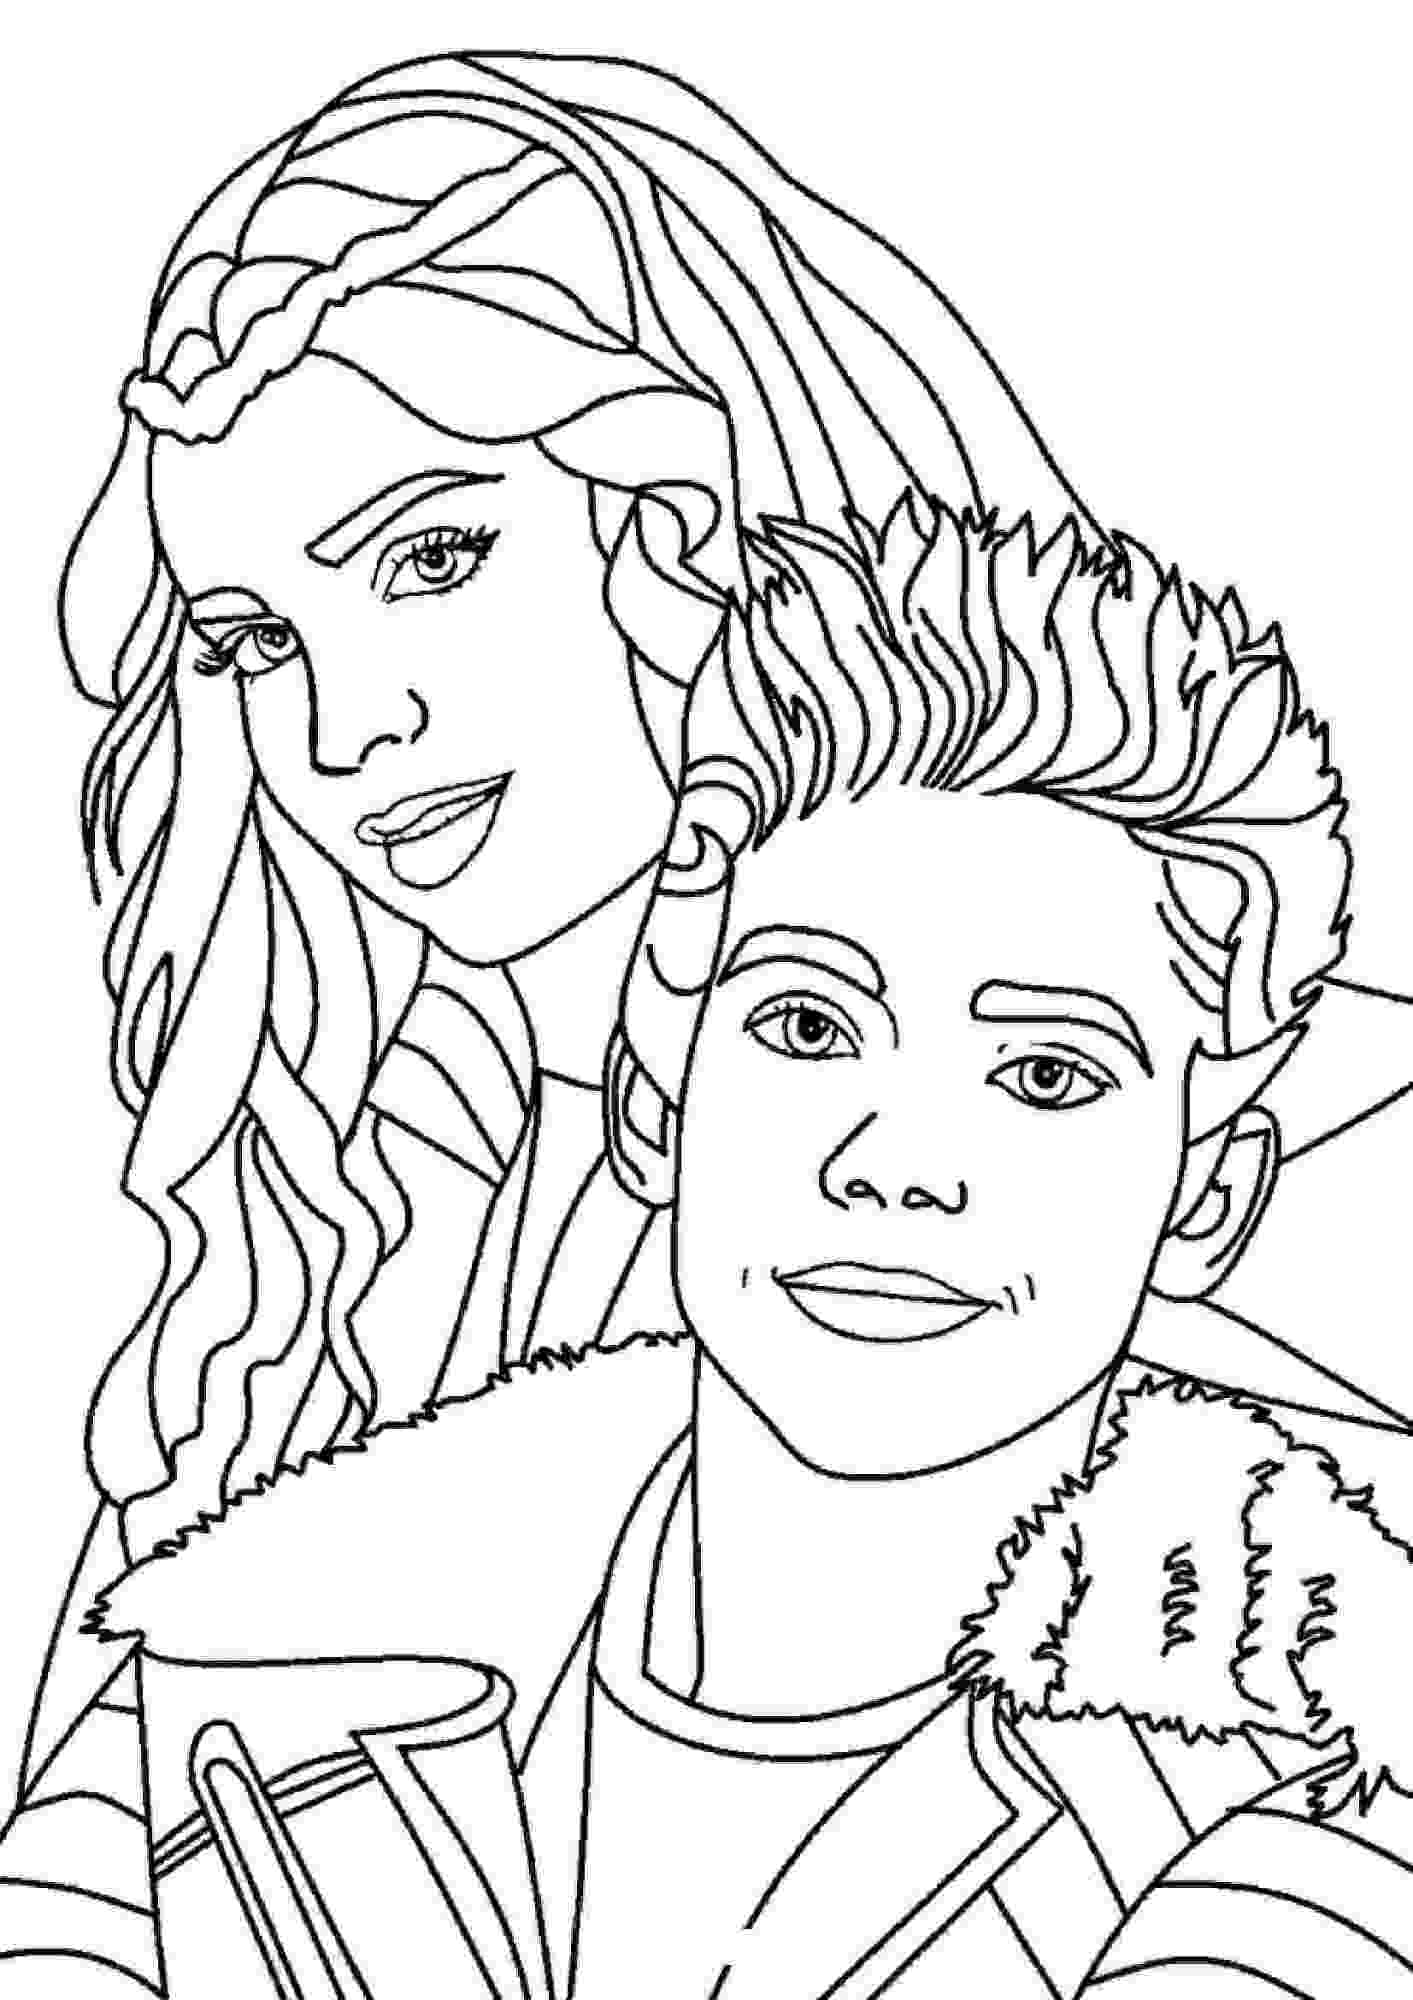 Evie and Carlos play together from Descendants Coloring Page